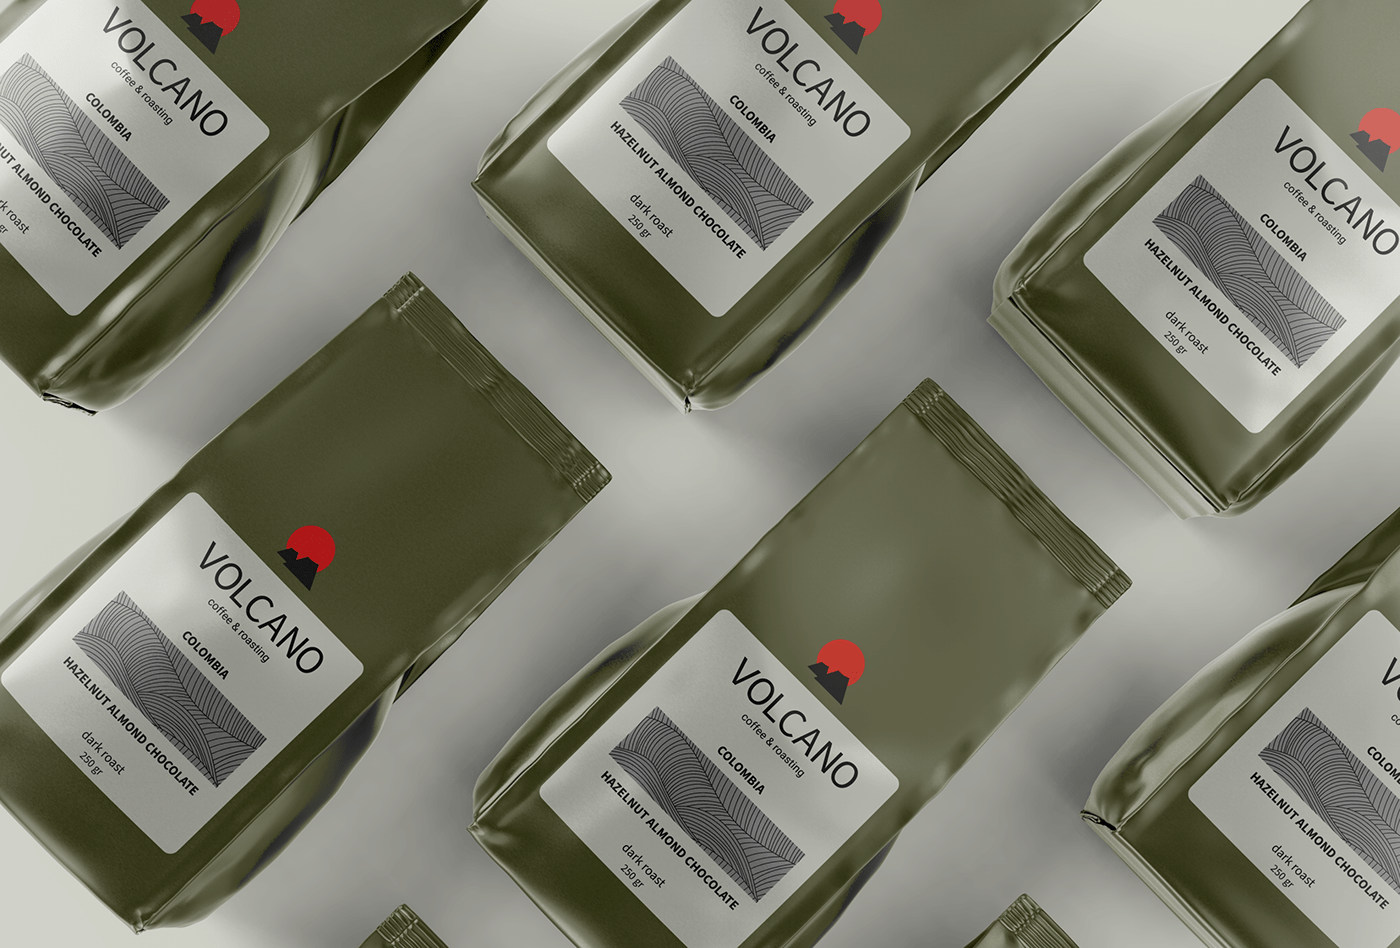 Packaging for coffee